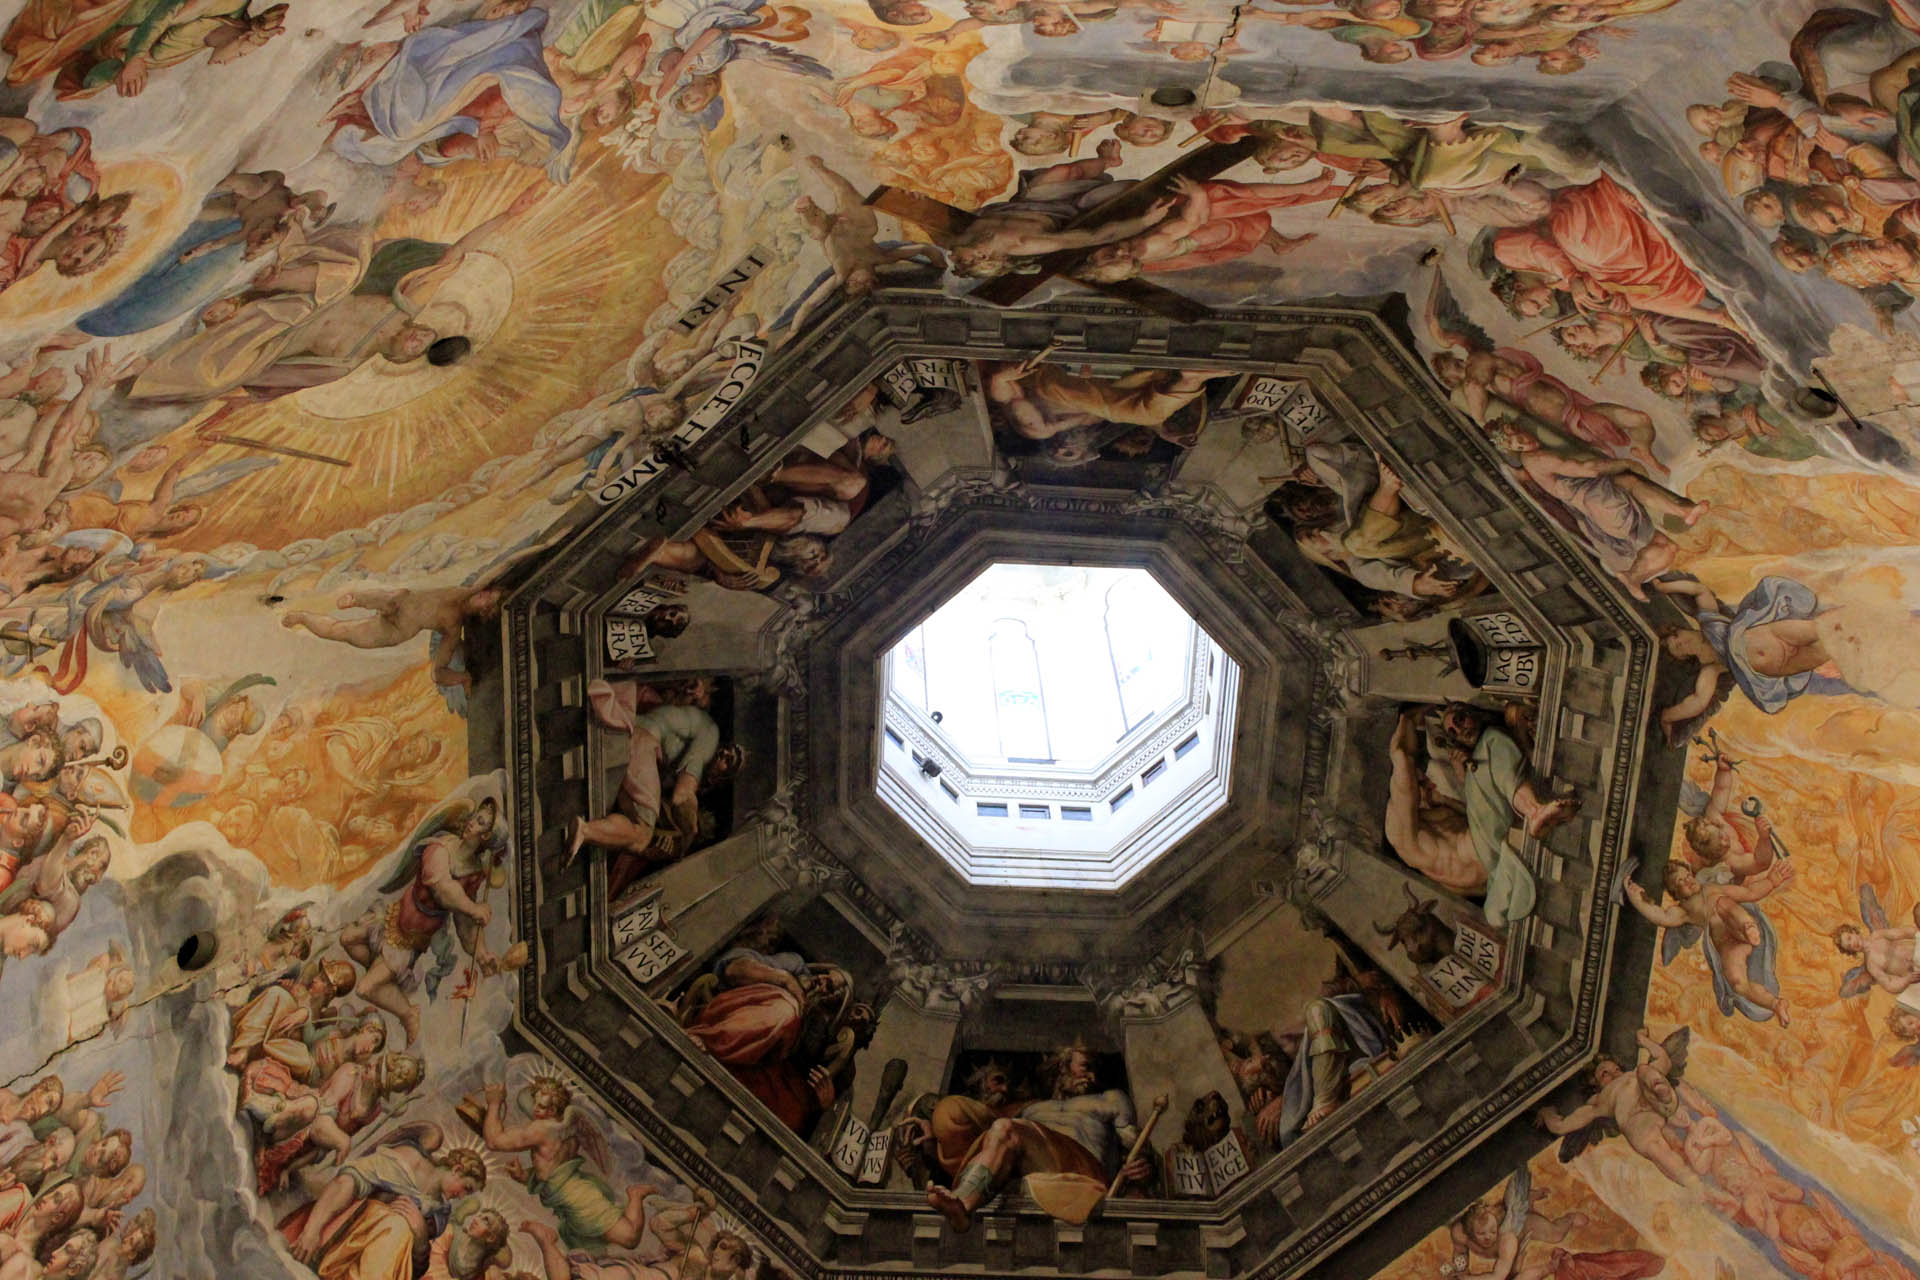 A view of the inner shell of Brunelleschi's Cupola